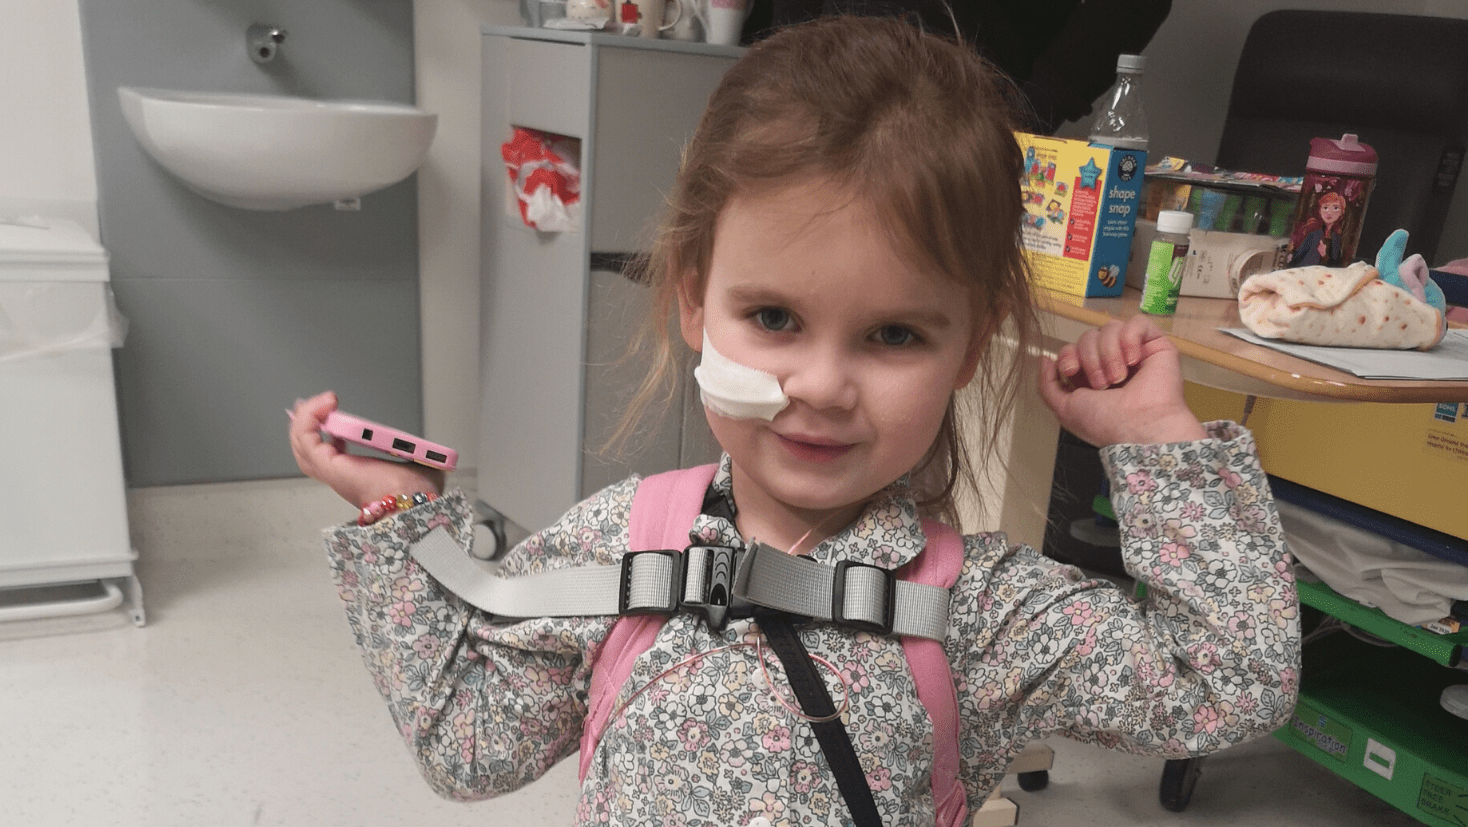 LifeSearch: Meet Sadie, a 4 yr old with a range of extremely complex health conditions known as SWAN